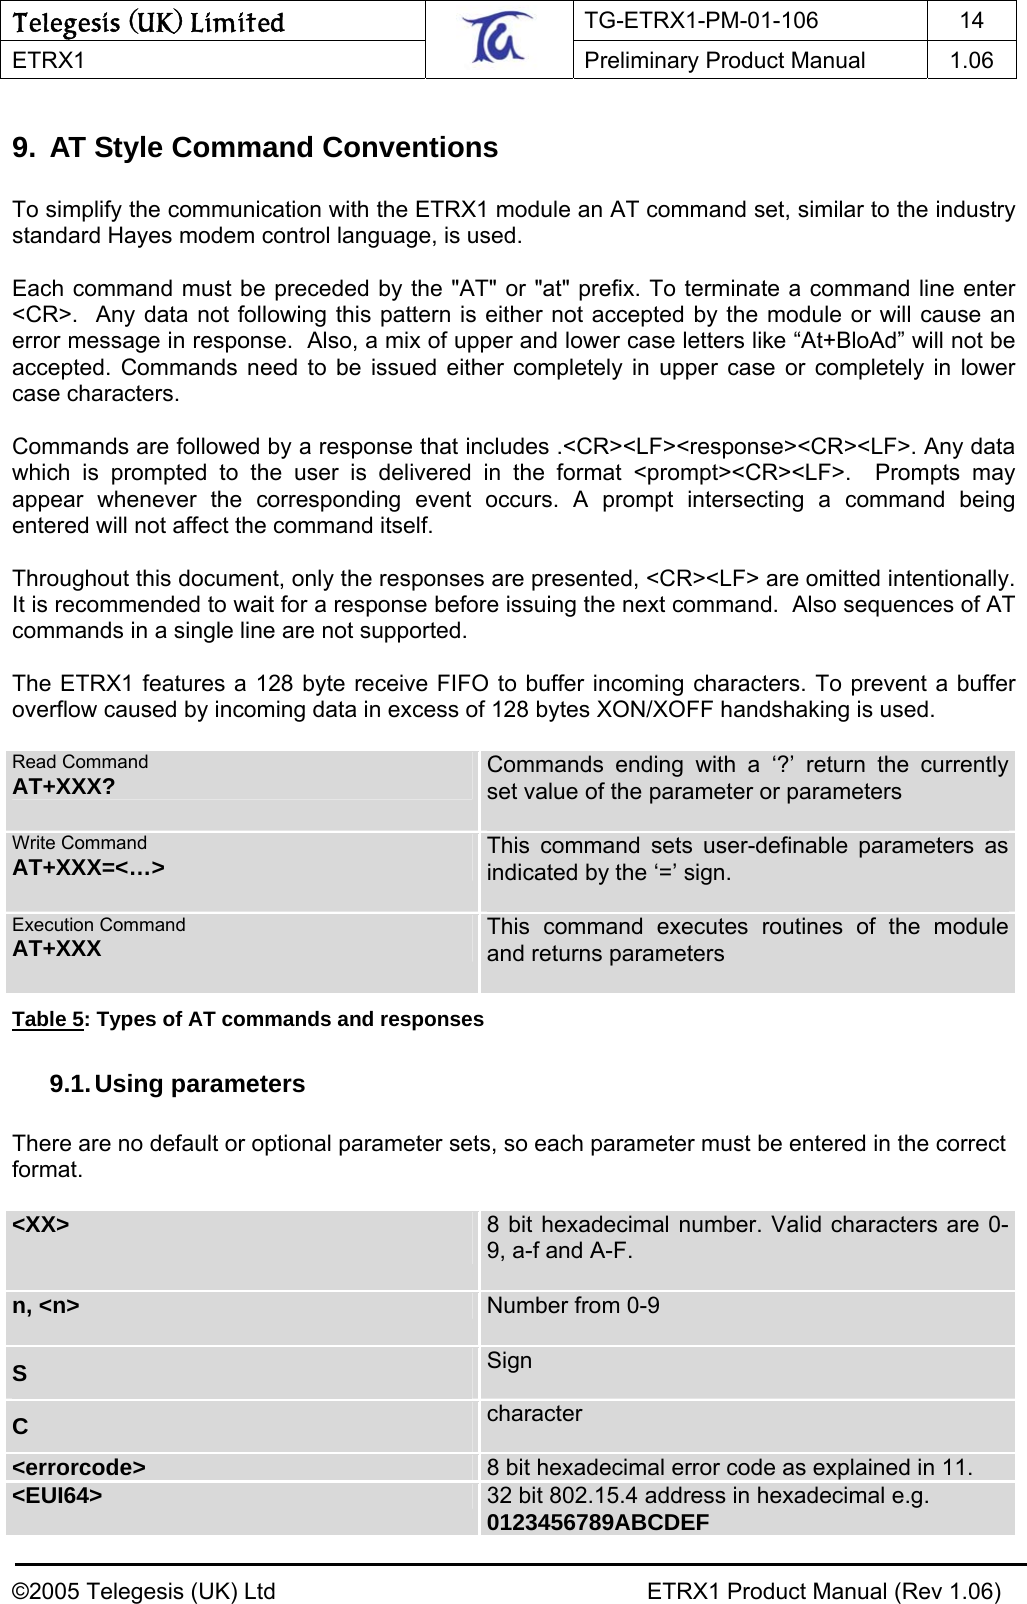 Telegesis (UK) Limited TG-ETRX1-PM-01-106 14  ETRX1    Preliminary Product Manual  1.06   9.  AT Style Command Conventions  To simplify the communication with the ETRX1 module an AT command set, similar to the industry standard Hayes modem control language, is used.  Each command must be preceded by the &quot;AT&quot; or &quot;at&quot; prefix. To terminate a command line enter &lt;CR&gt;.  Any data not following this pattern is either not accepted by the module or will cause an error message in response.  Also, a mix of upper and lower case letters like “At+BloAd” will not be accepted. Commands need to be issued either completely in upper case or completely in lower case characters.  Commands are followed by a response that includes .&lt;CR&gt;&lt;LF&gt;&lt;response&gt;&lt;CR&gt;&lt;LF&gt;. Any data which is prompted to the user is delivered in the format &lt;prompt&gt;&lt;CR&gt;&lt;LF&gt;.  Prompts may appear whenever the corresponding event occurs. A prompt intersecting a command being entered will not affect the command itself.  Throughout this document, only the responses are presented, &lt;CR&gt;&lt;LF&gt; are omitted intentionally.  It is recommended to wait for a response before issuing the next command.  Also sequences of AT commands in a single line are not supported.  The ETRX1 features a 128 byte receive FIFO to buffer incoming characters. To prevent a buffer overflow caused by incoming data in excess of 128 bytes XON/XOFF handshaking is used.    Read Command AT+XXX?  Commands ending with a ‘?’ return the currently set value of the parameter or parameters  Write Command AT+XXX=&lt;…&gt; This command sets user-definable parameters as indicated by the ‘=’ sign.  Execution Command AT+XXX This command executes routines of the module and returns parameters  Table 5: Types of AT commands and responses 9.1. Using  parameters  There are no default or optional parameter sets, so each parameter must be entered in the correct format.  &lt;XX&gt;  8 bit hexadecimal number. Valid characters are 0-9, a-f and A-F.  n, &lt;n&gt;  Number from 0-9  S  Sign C  character &lt;errorcode&gt;  8 bit hexadecimal error code as explained in 11.  &lt;EUI64&gt;  32 bit 802.15.4 address in hexadecimal e.g. 0123456789ABCDEF ©2005 Telegesis (UK) Ltd    ETRX1 Product Manual (Rev 1.06) 